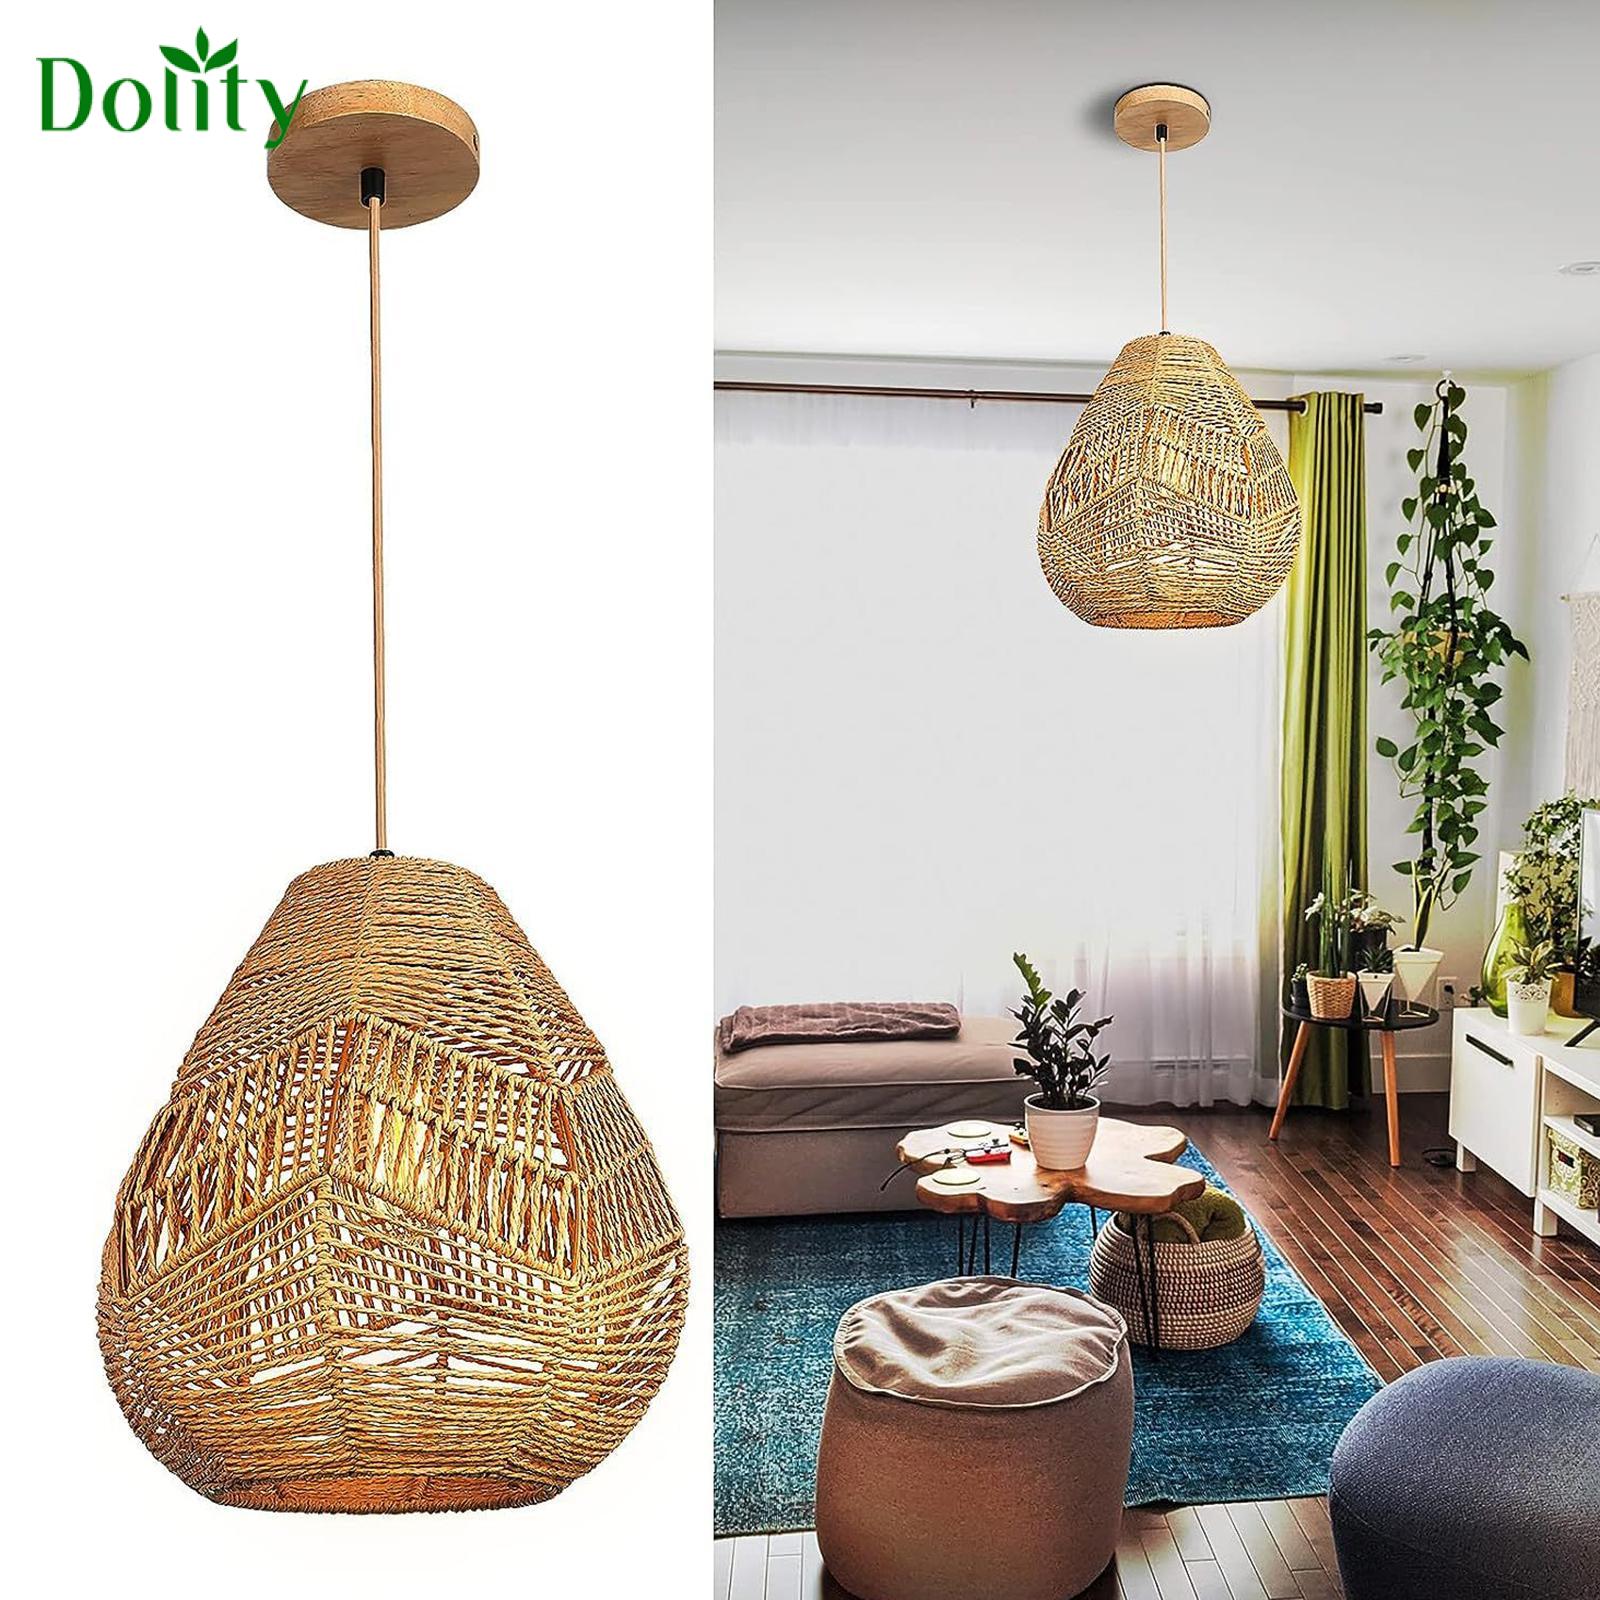 Dolity Rope Lampshade Wicker Pendant Light Shade Pendant Sconce Shade for